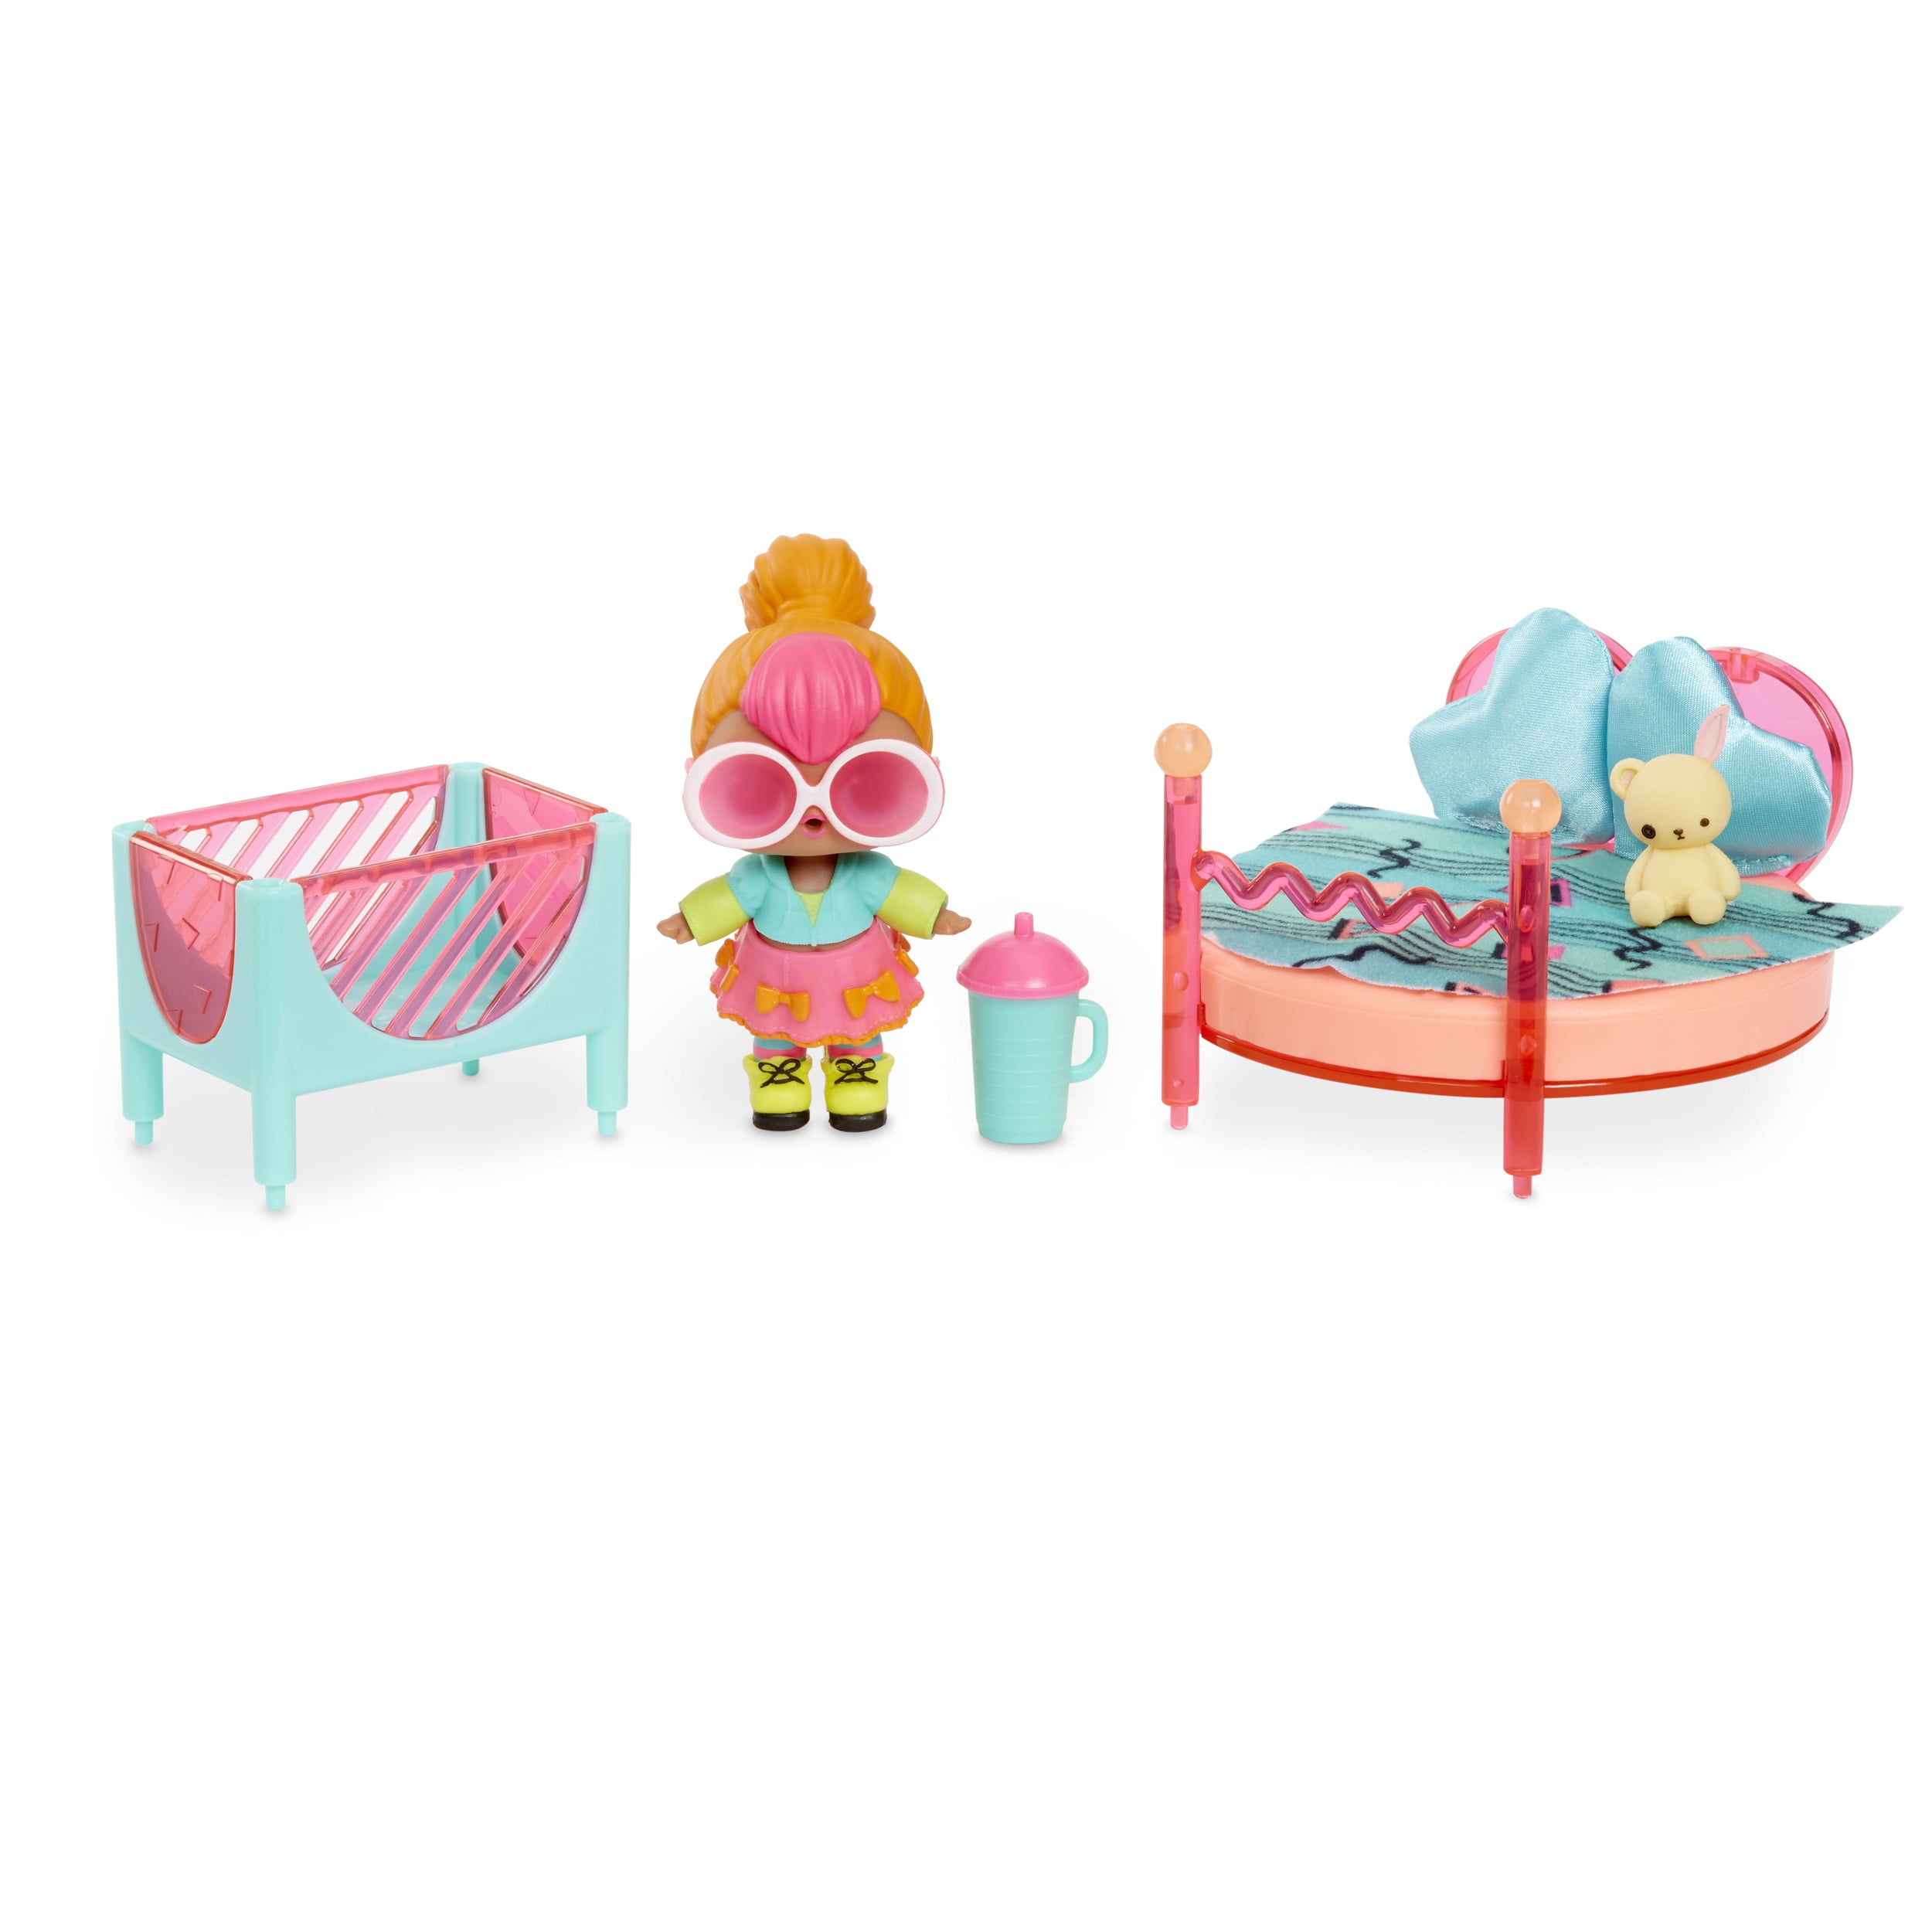 LOL Doll Accessories 2 LOL Bunk Beds and 4 strollers for LOL Dolls